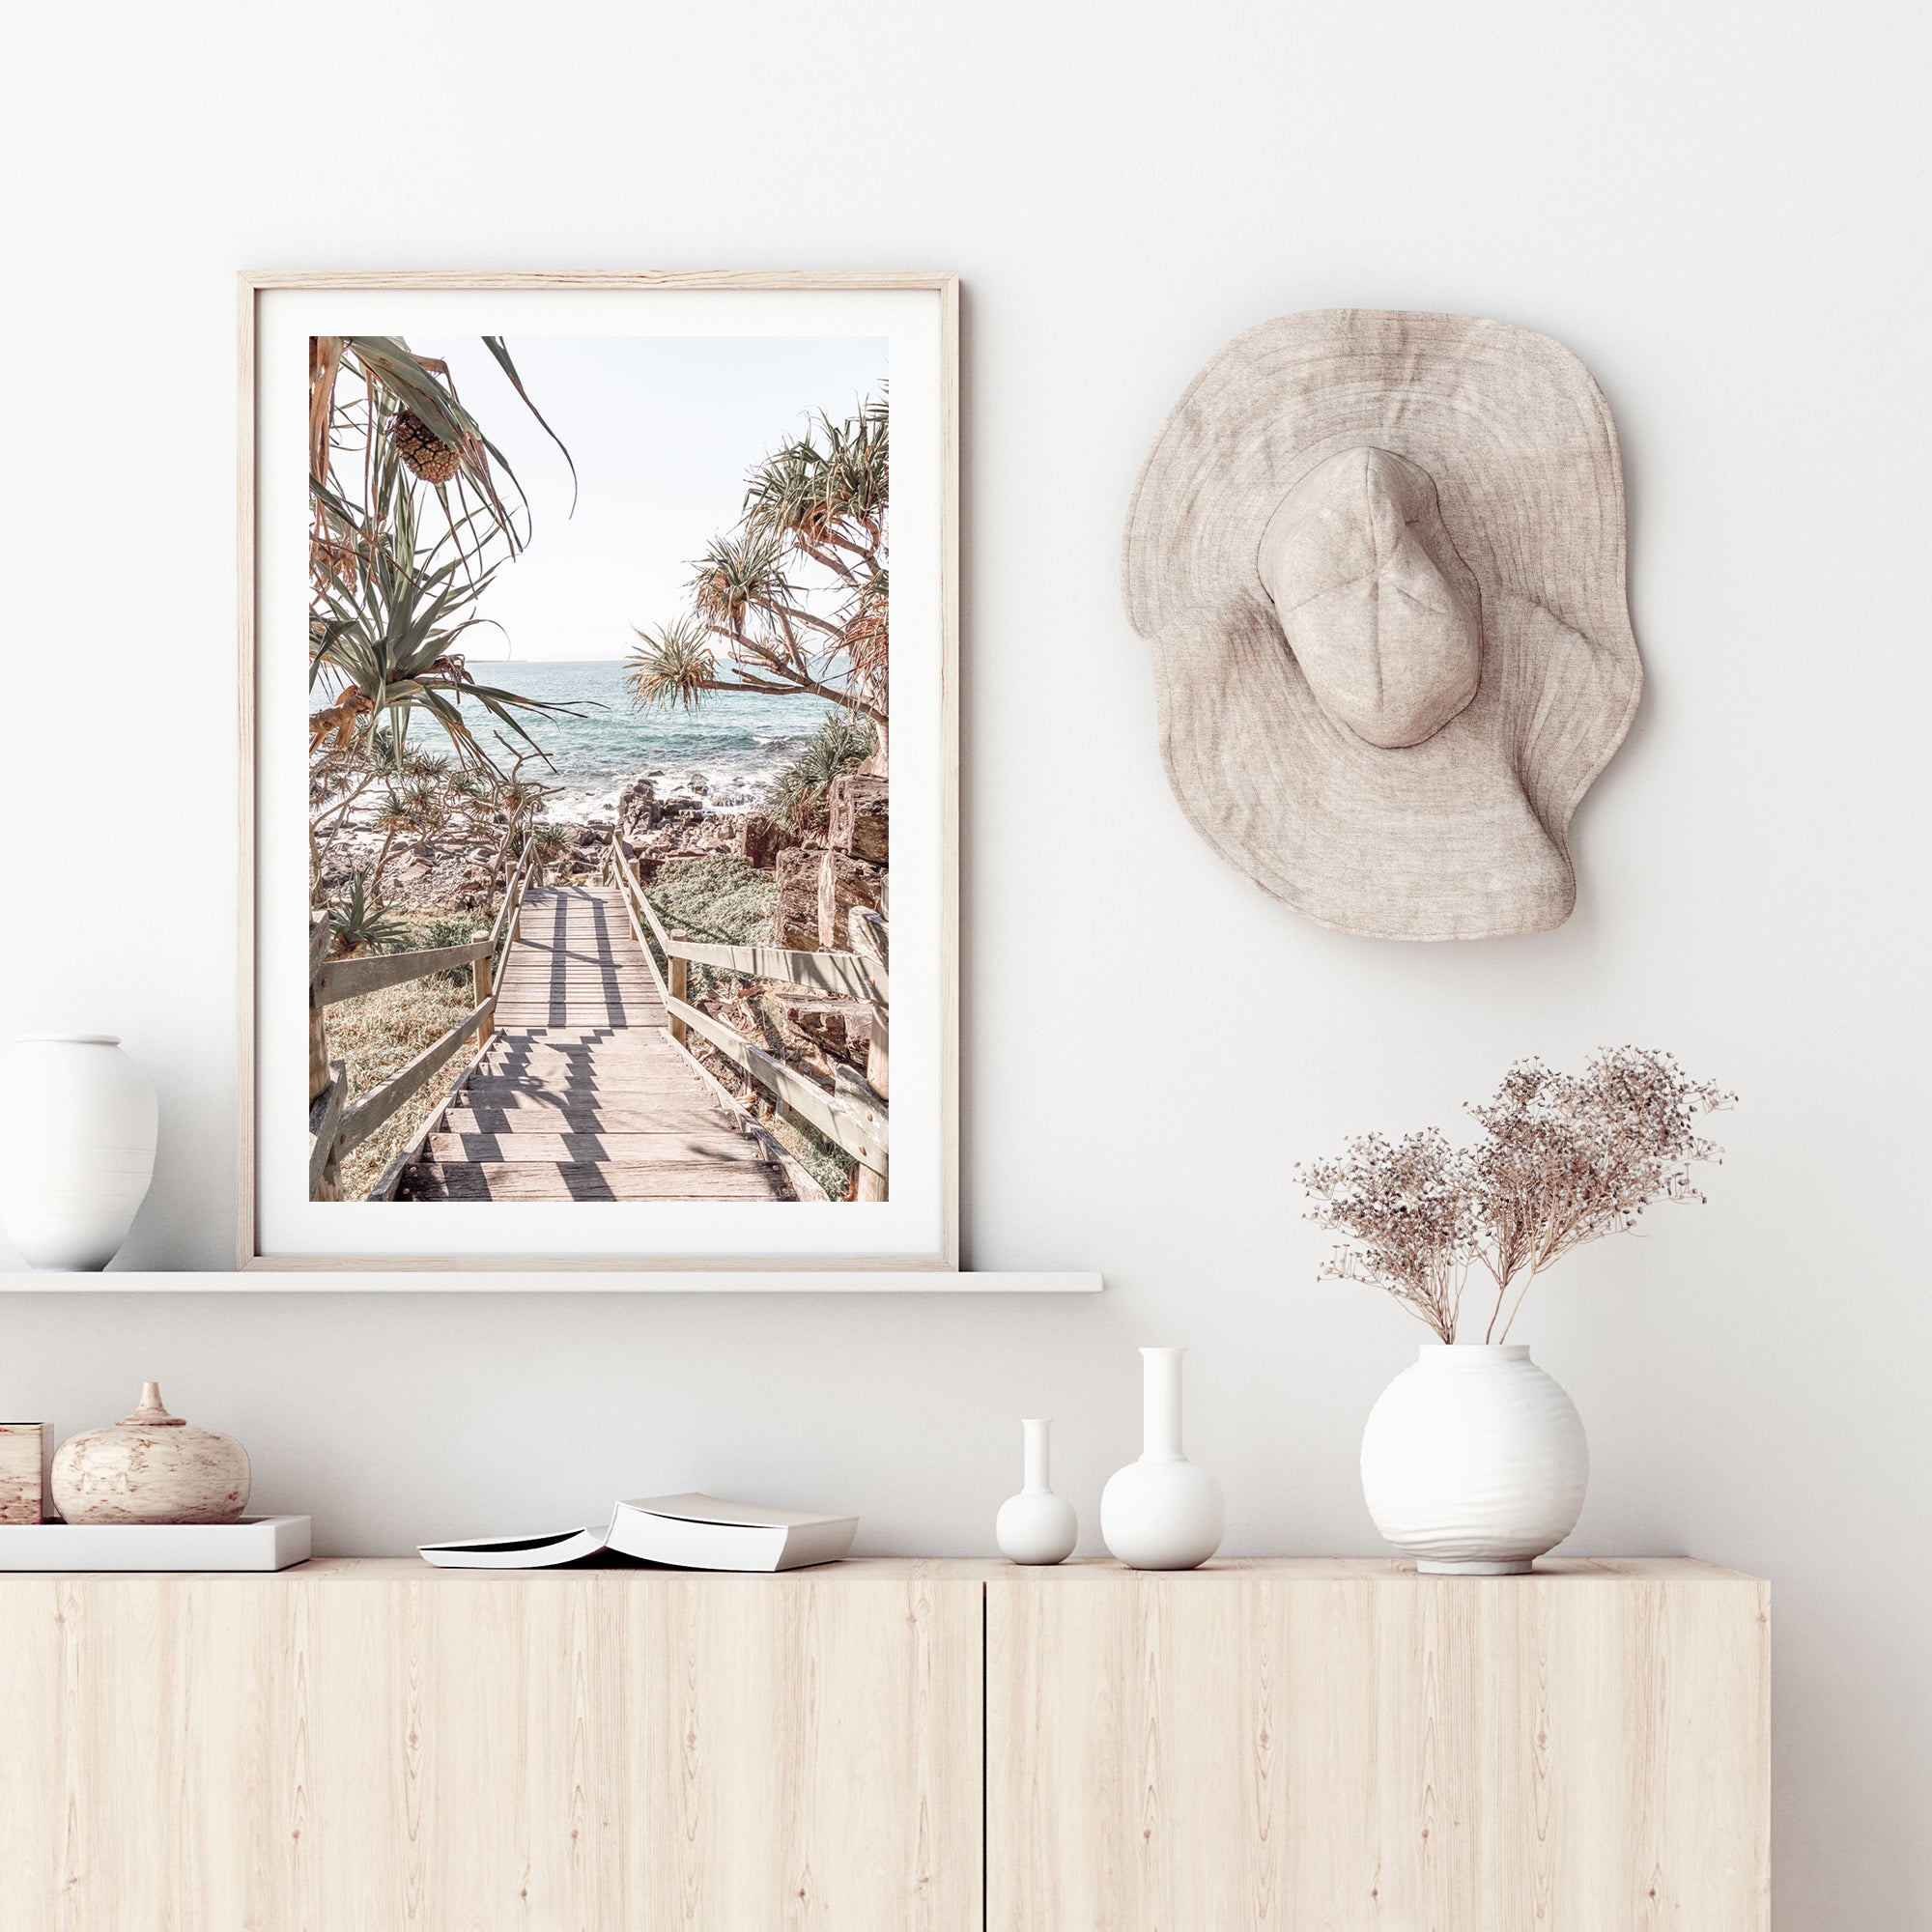 The stunning blue of the sea can be seen from stairs leading onto a Queensland Beach in this photographic wall art print.